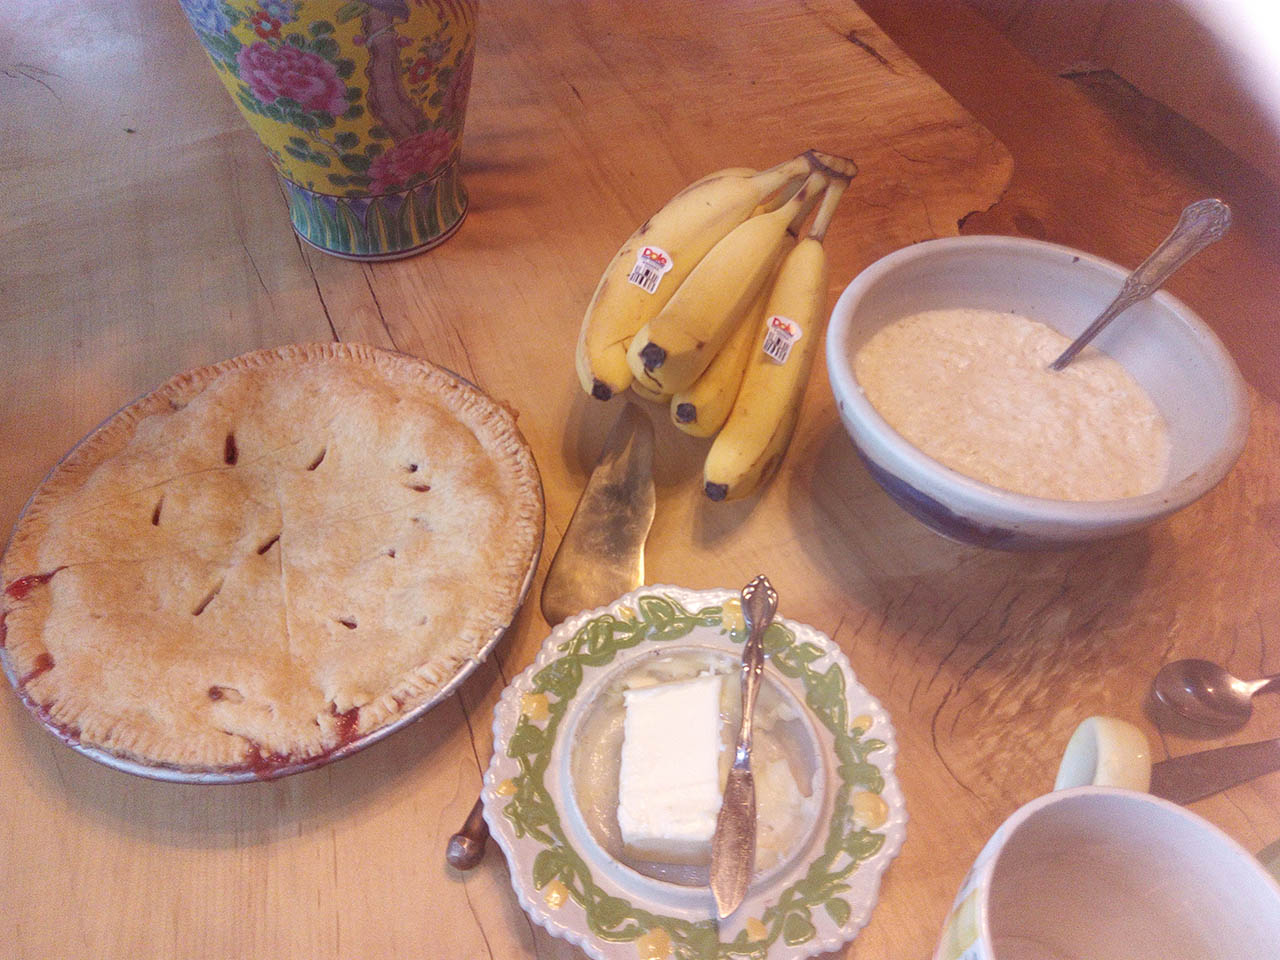 Bananas, pie, oatmeal and butter.